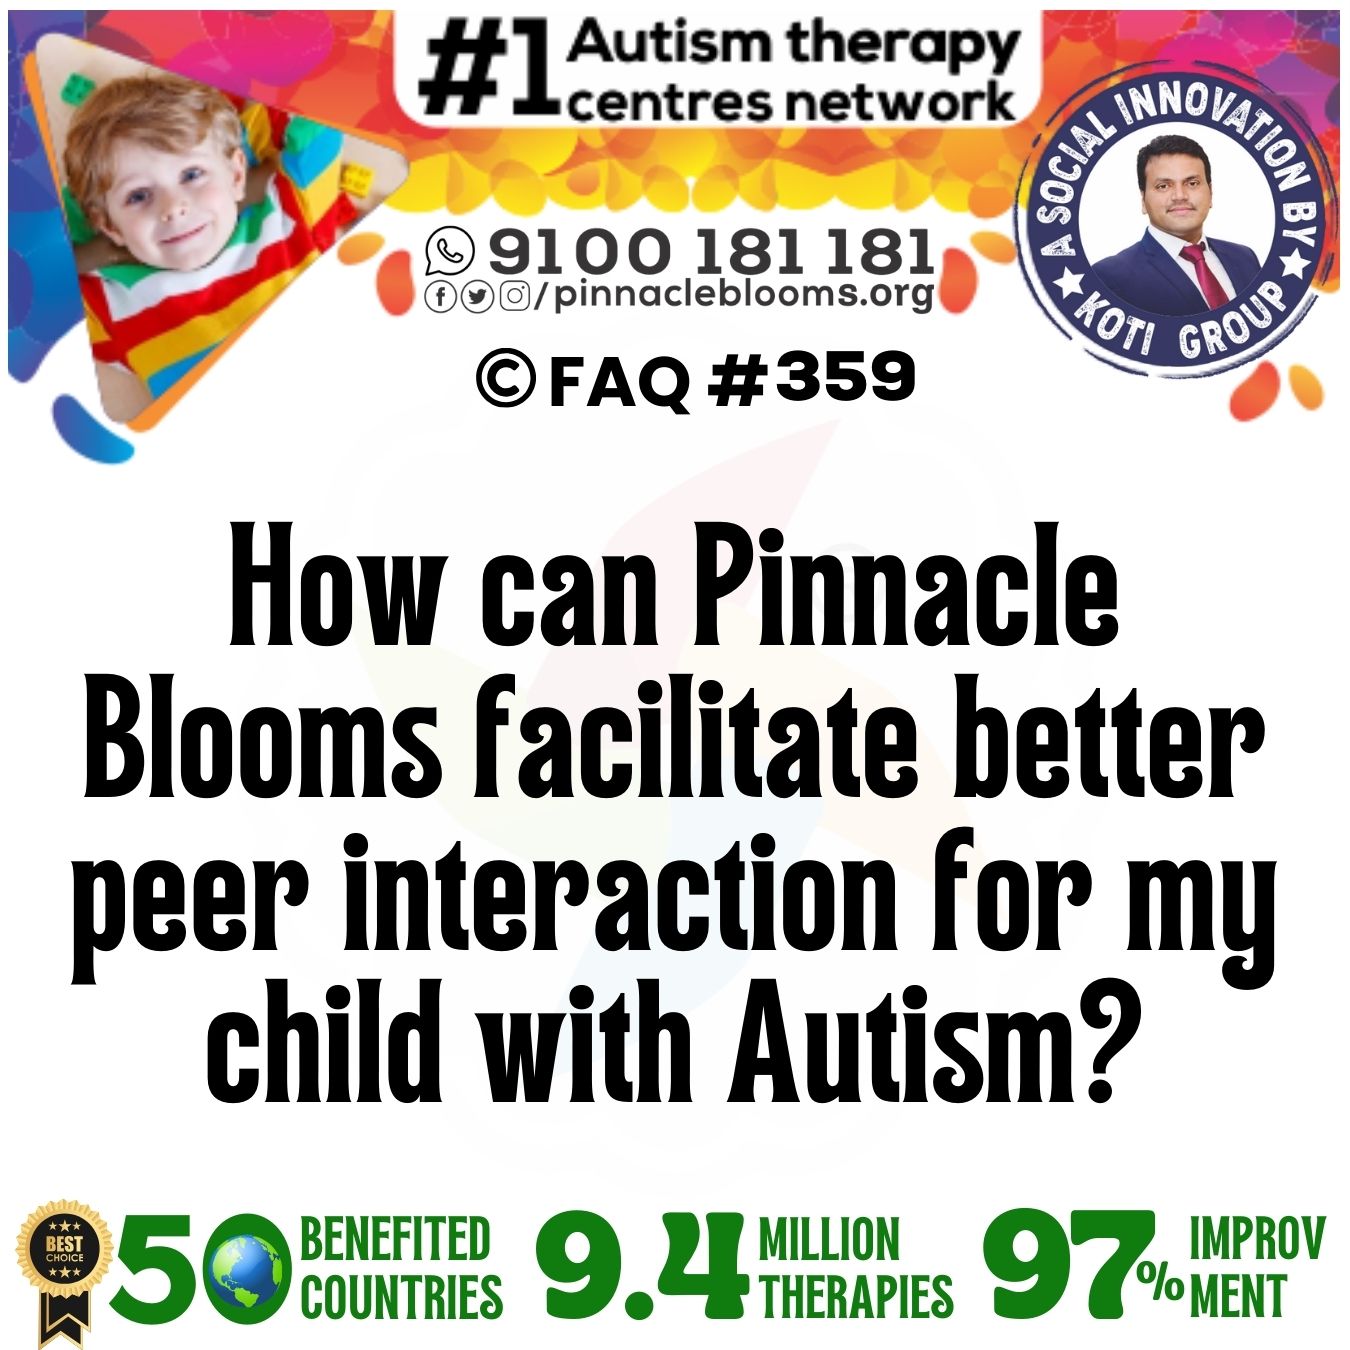 How can Pinnacle Blooms facilitate better peer interaction for my child with Autism?